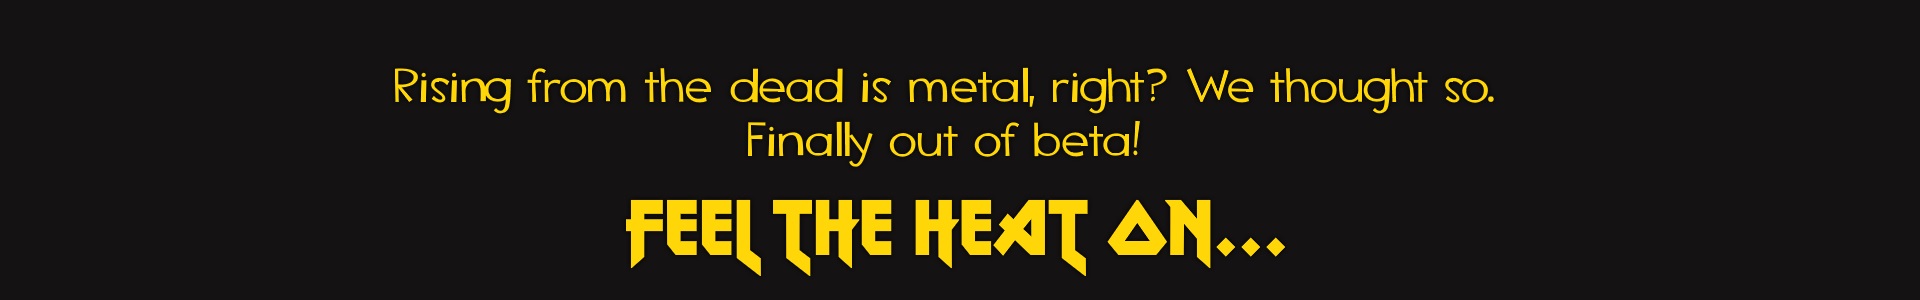 Rising from the dead is metal, right? We thought so. Finally out of beta! Feel the heat on...